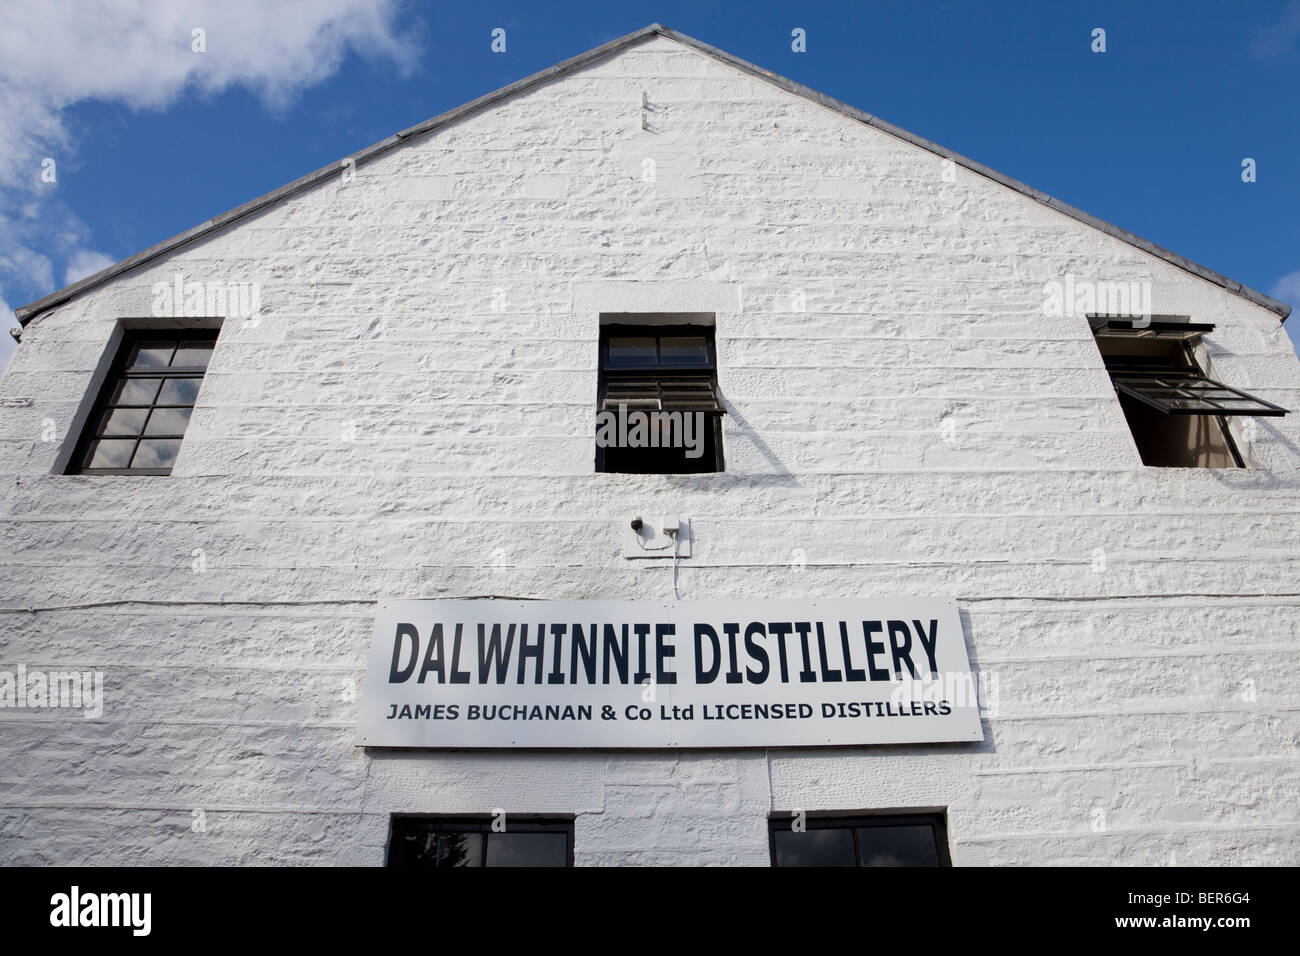 Dalwhinnie Distillery building with sign, wide angle Stock Photo